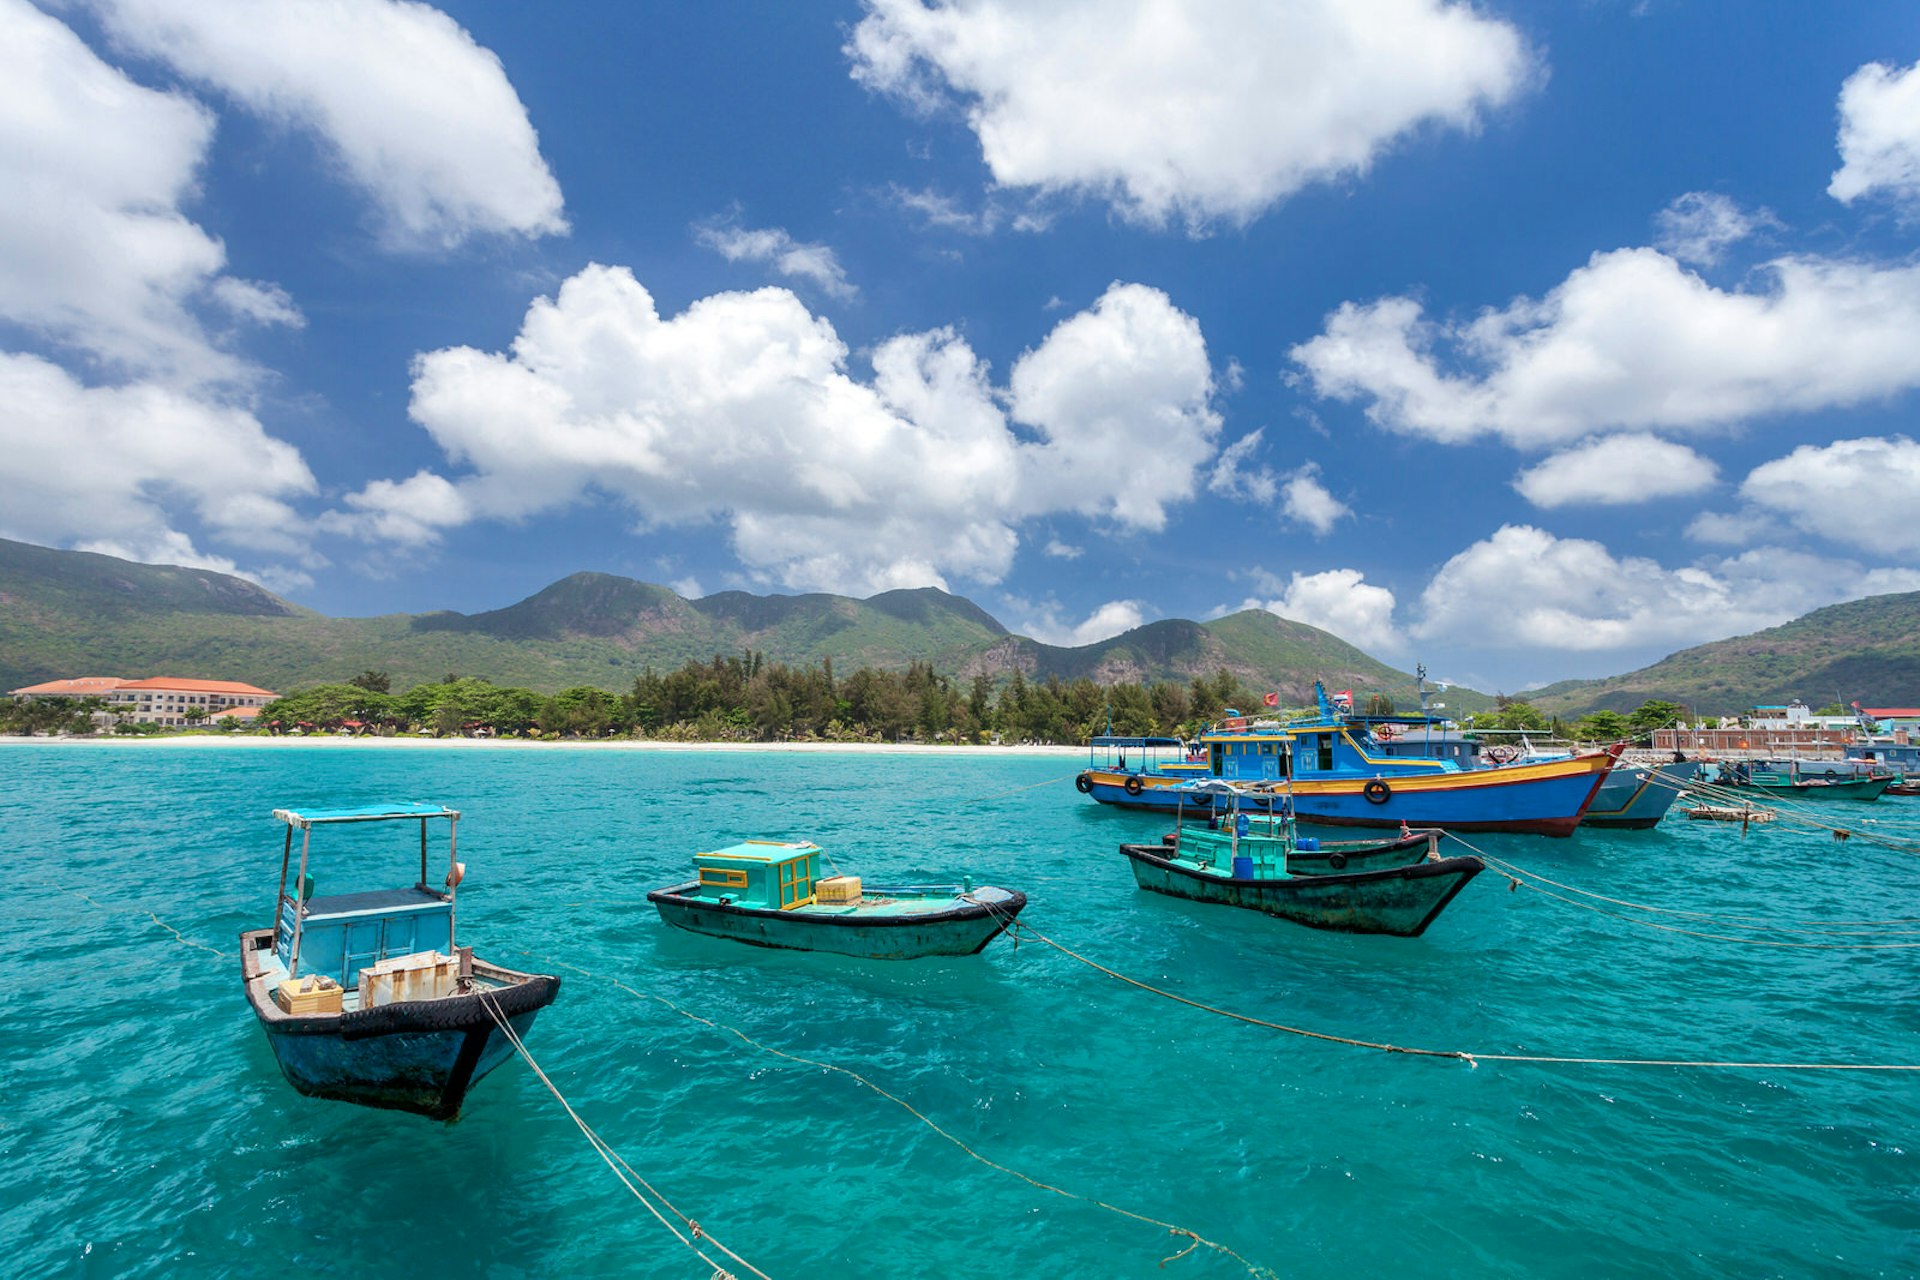 Vietnamese fishing boats on a tropical Con Dao Island. View from the pier in the direction of a beach with white sand.